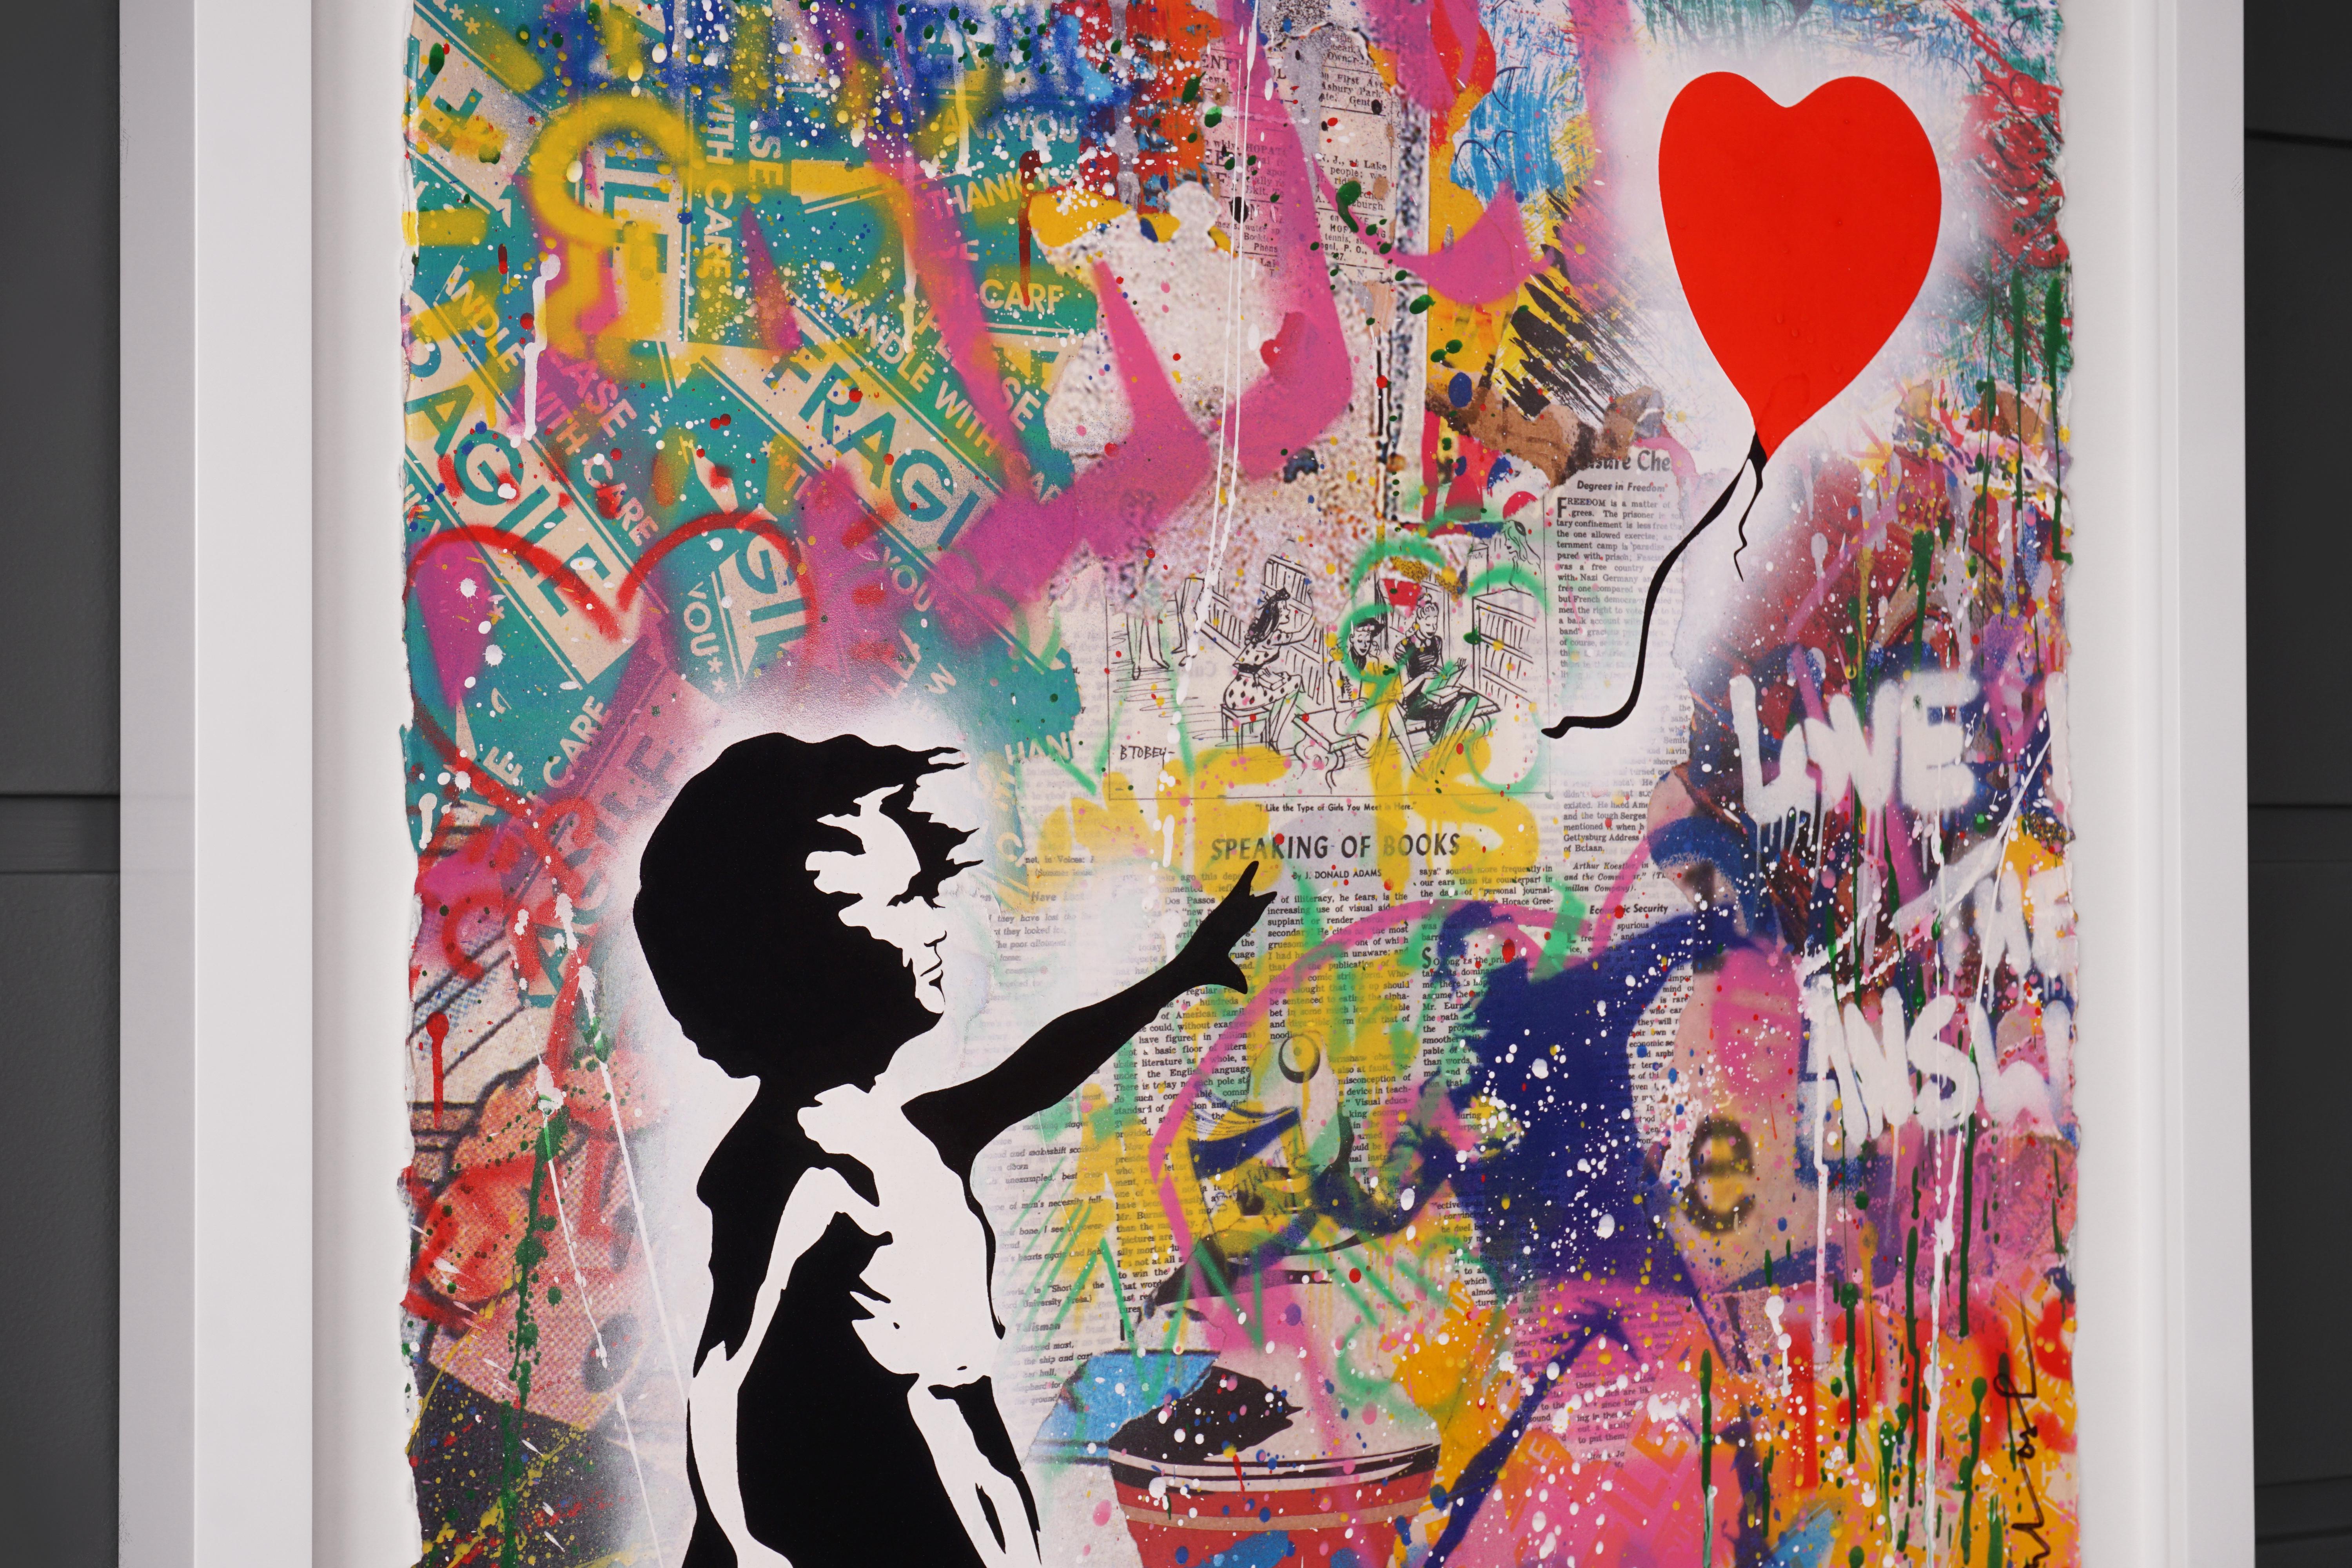 The ‘Balloon Girl’ by french contemporary artist Mr. Brainwash was created in 2020 in his signature style of layering paint, stencil, and mixed media on paper to create a cultural commentary in vibrant visual format. This piece is a unique work, an